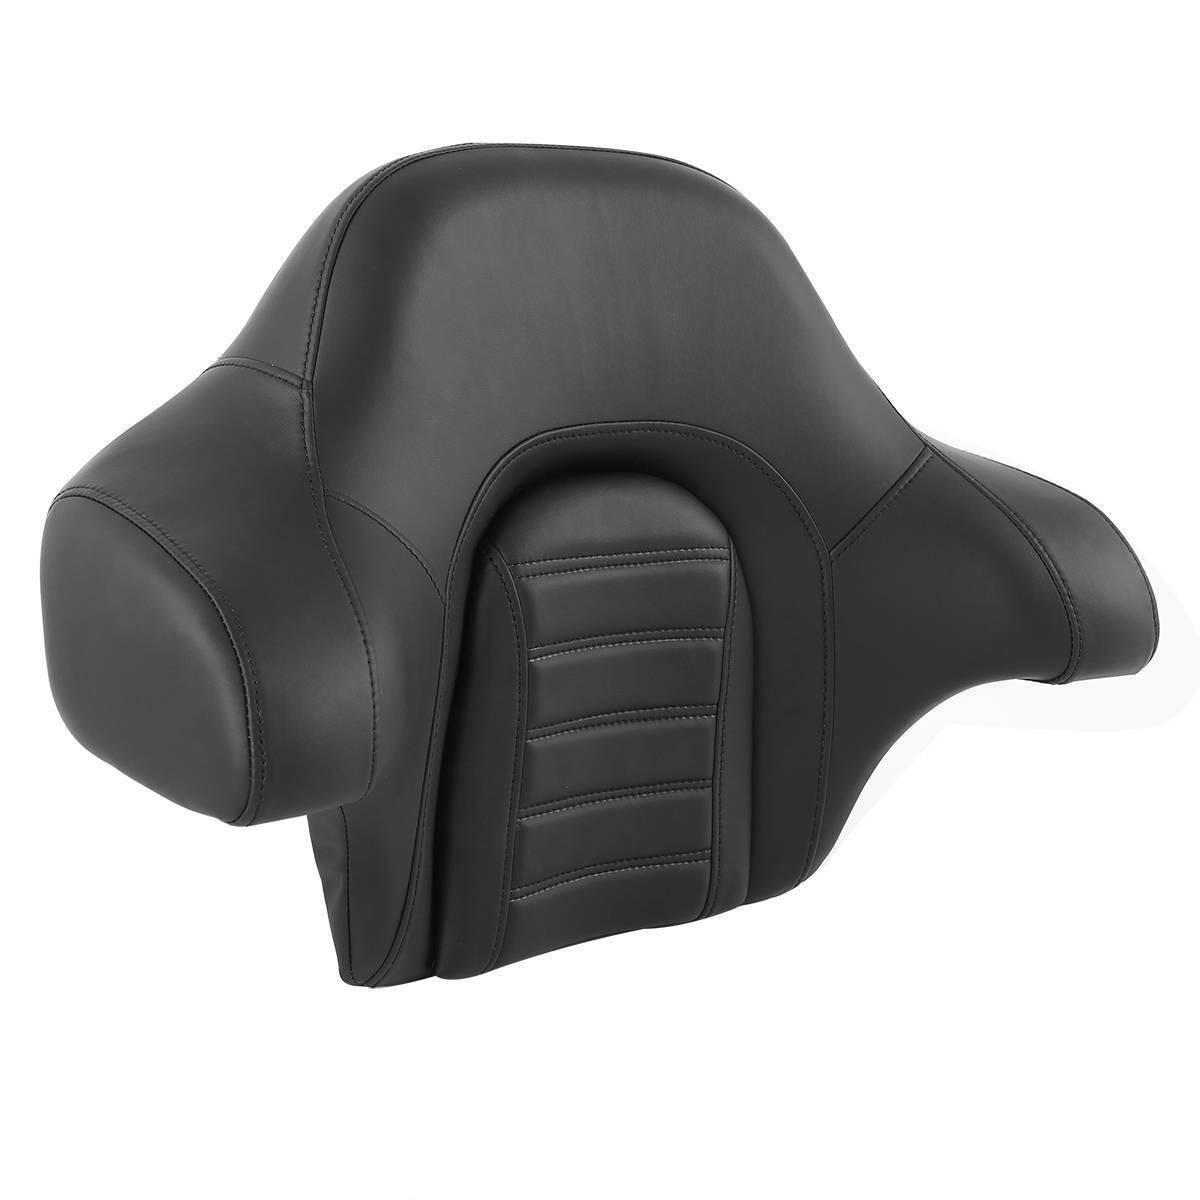 King Chopped Trunk Passenger Backrest Fit For Harley Street Road Glide 14-22 17 - Moto Life Products